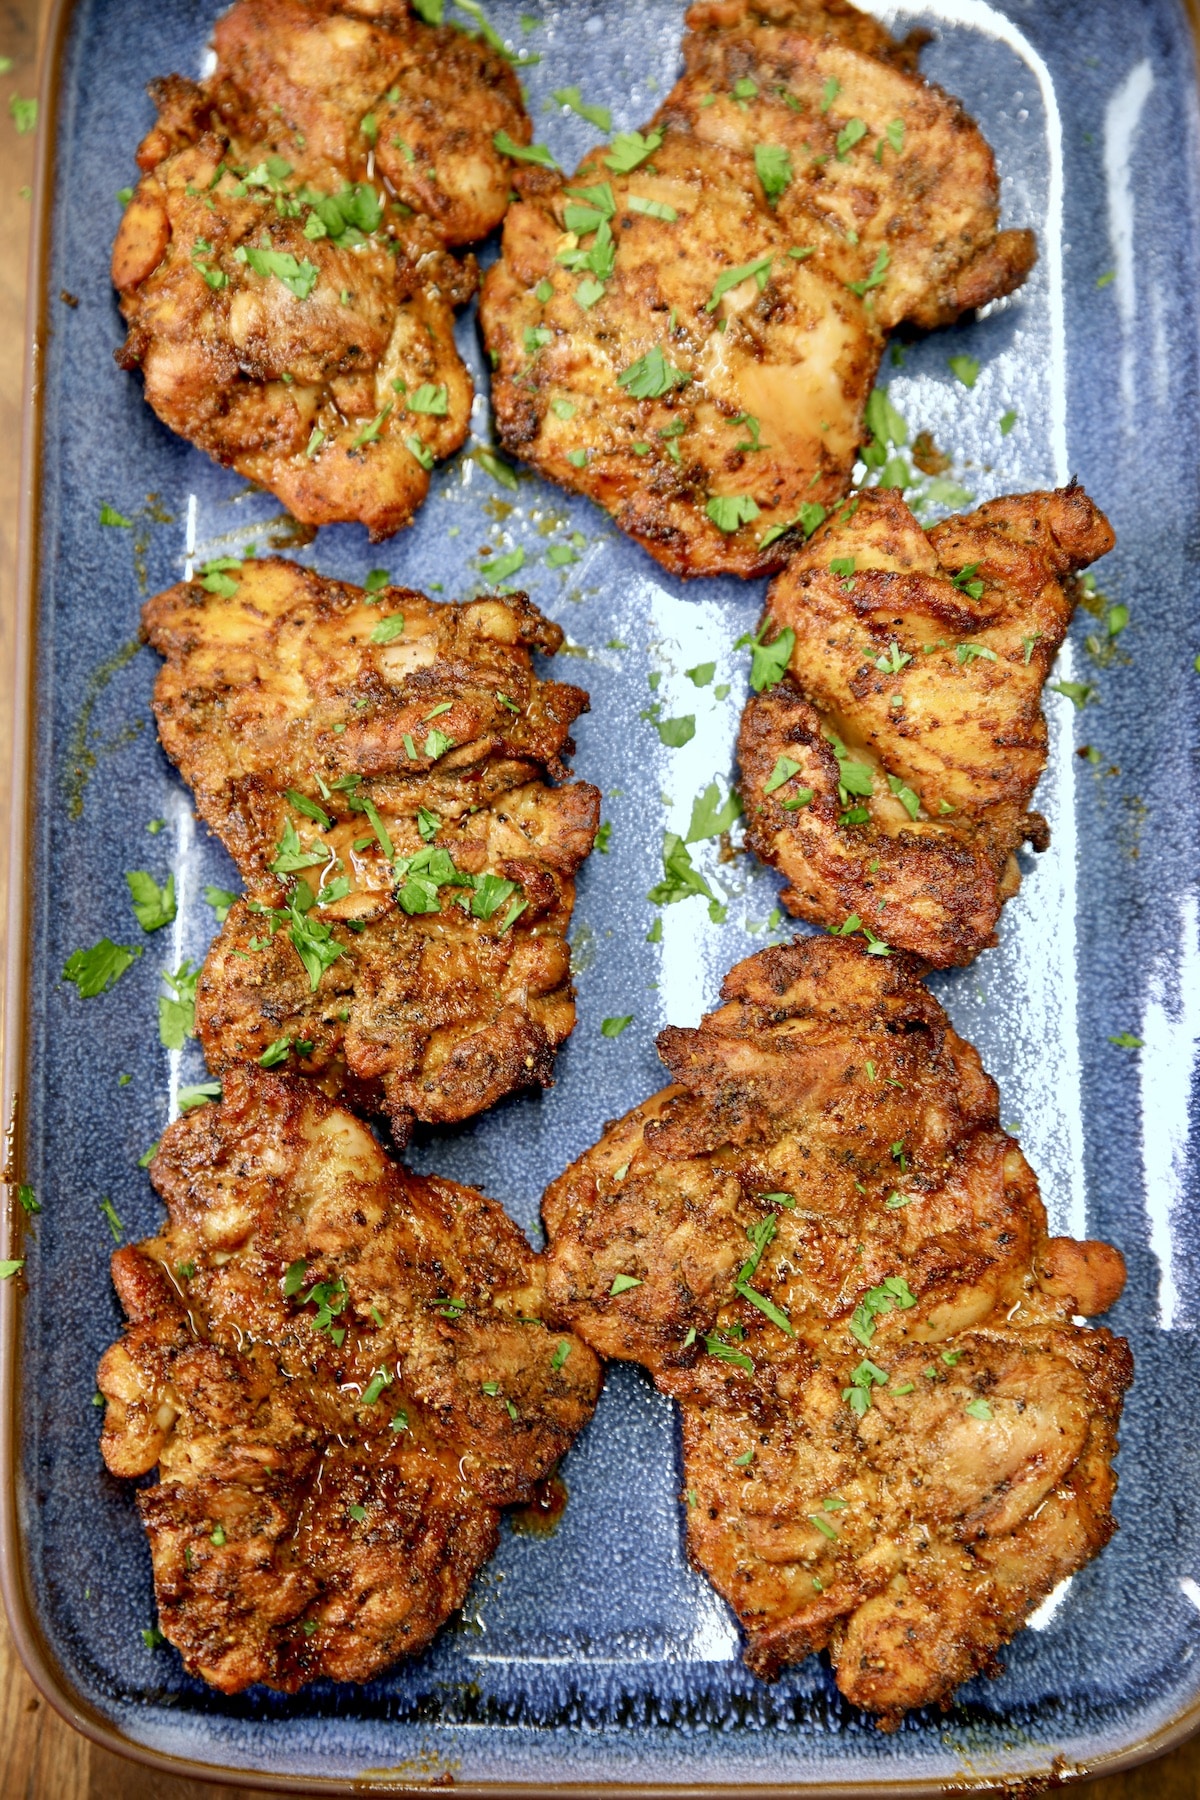 Grilled chicken thighs with shawarma marinade on a platter.